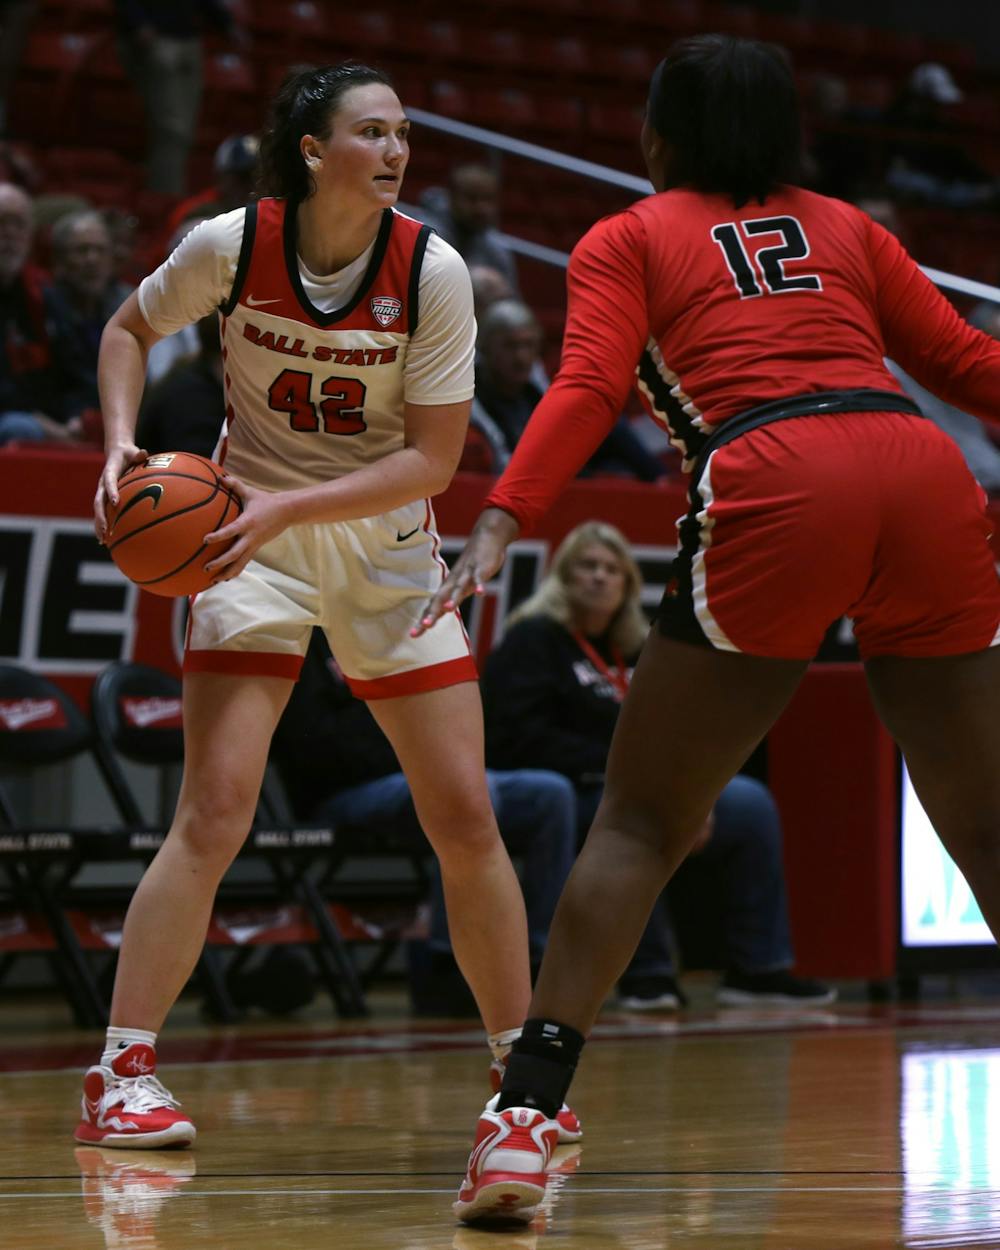 Senior Annie Rauch looks to pass the ball to a teammate in an exhibition game against Wheeling University Nov. 1 at Worthen Arena. Amber Pietz, DN